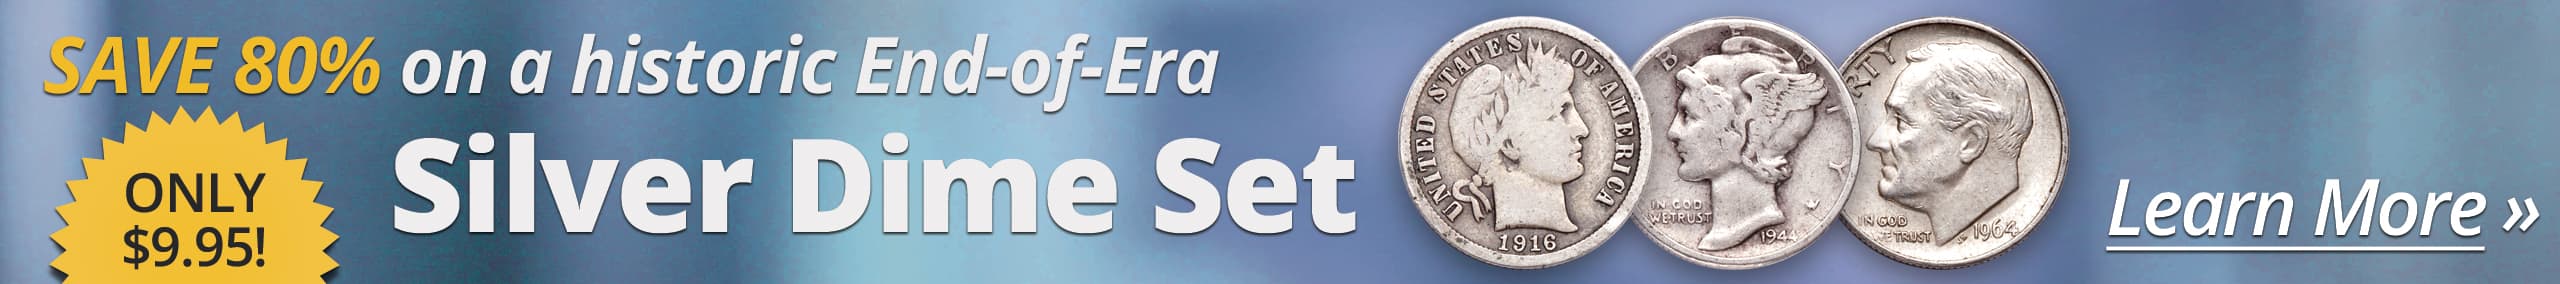 Save 80% on a historic End-of-Era Silver Dime Set! U.S. Dime Collection - Only $9.95 Buy Now